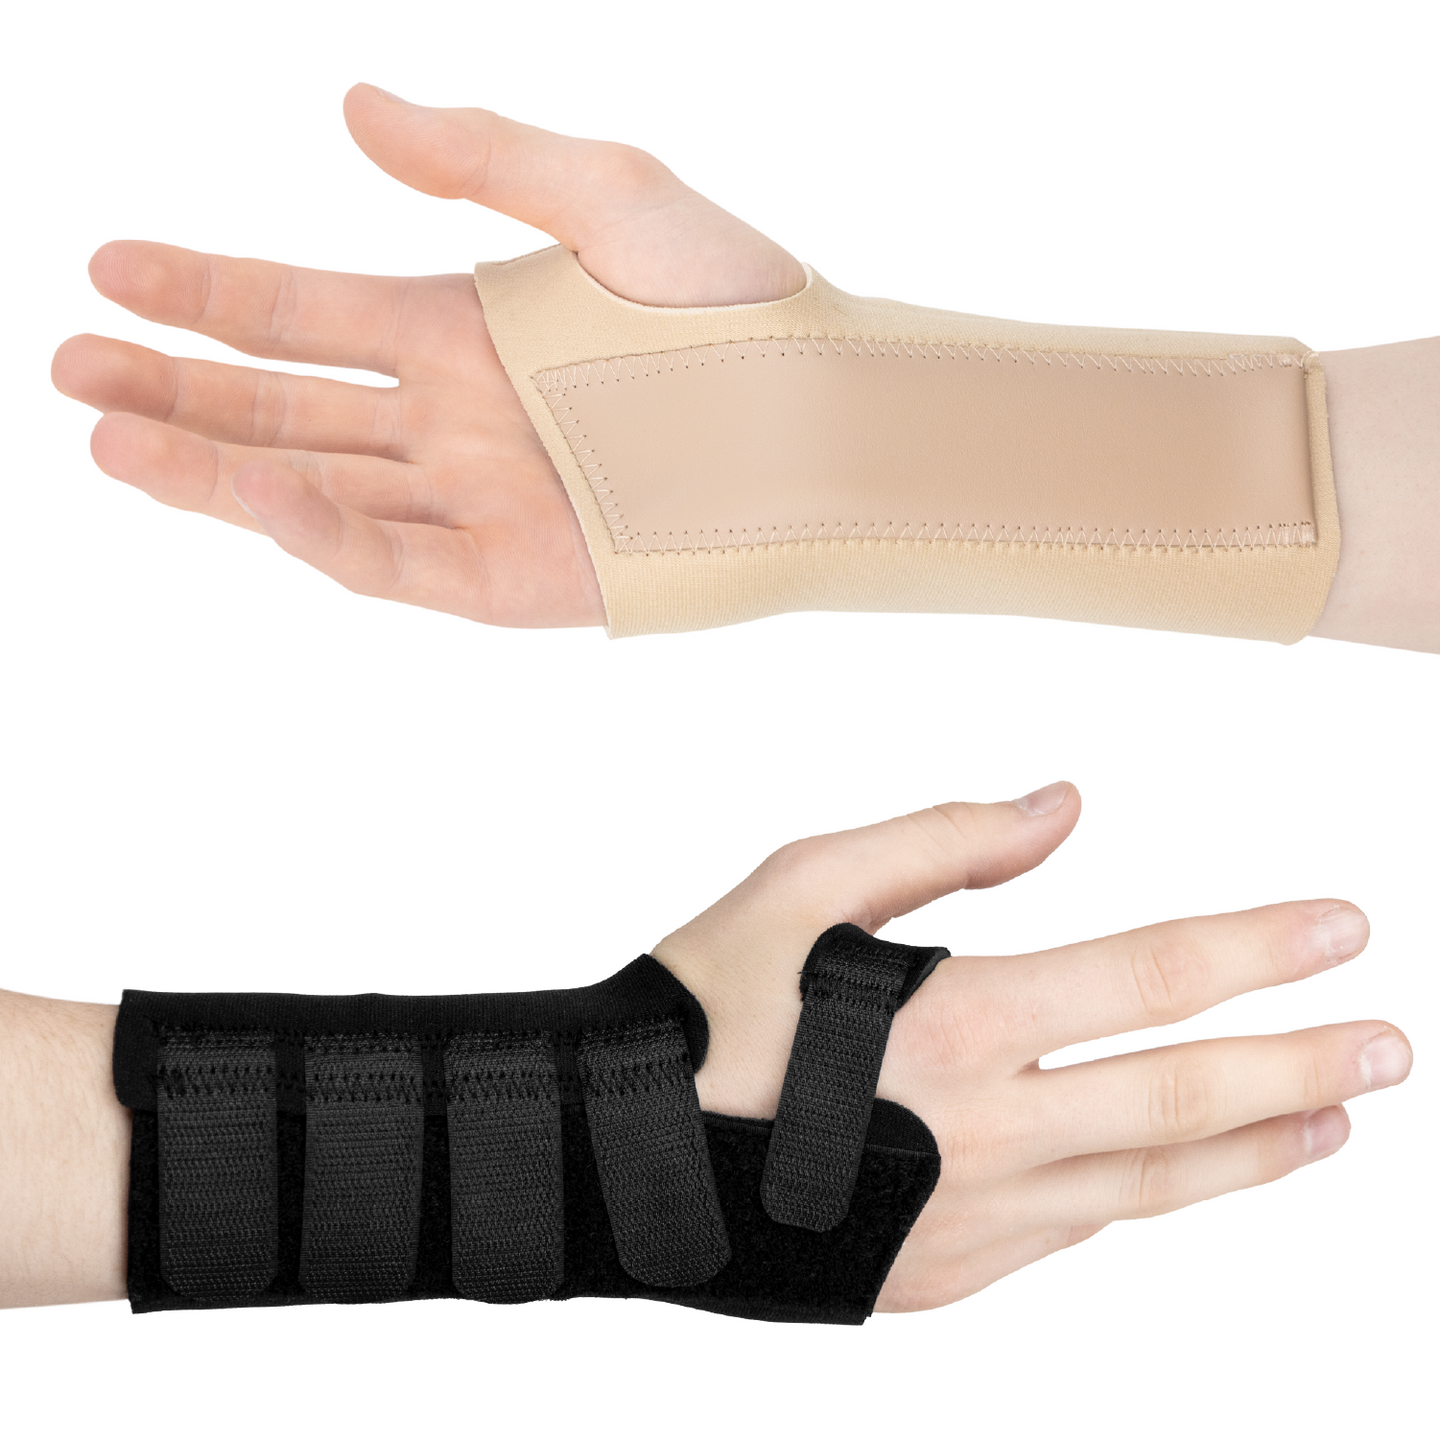 Wrist Wraps for Wrist Support – Wrist Compression for Tendonitis